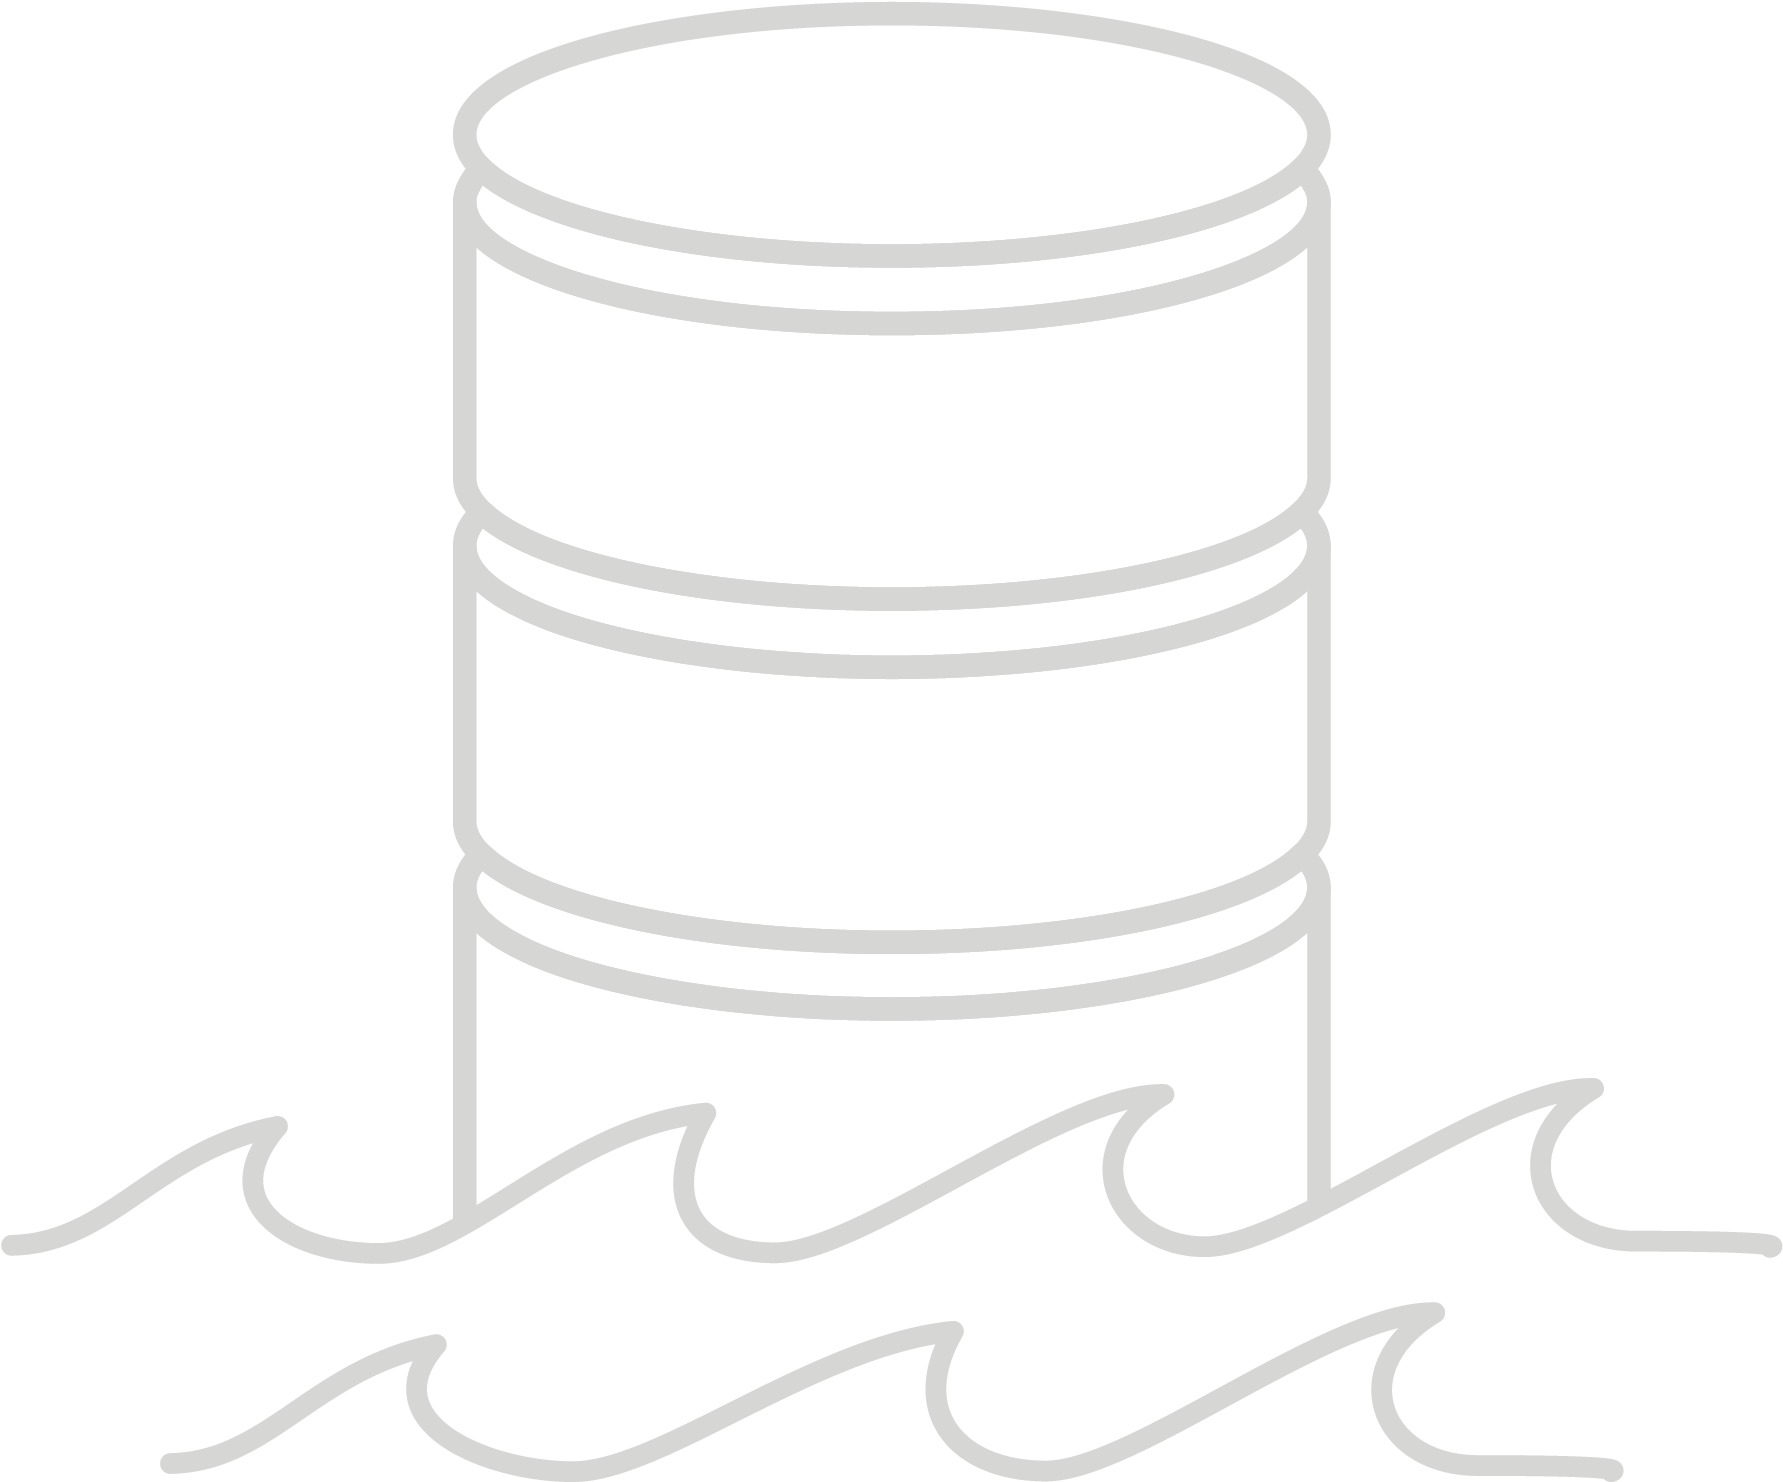 A Barrel Of Oil In The Water